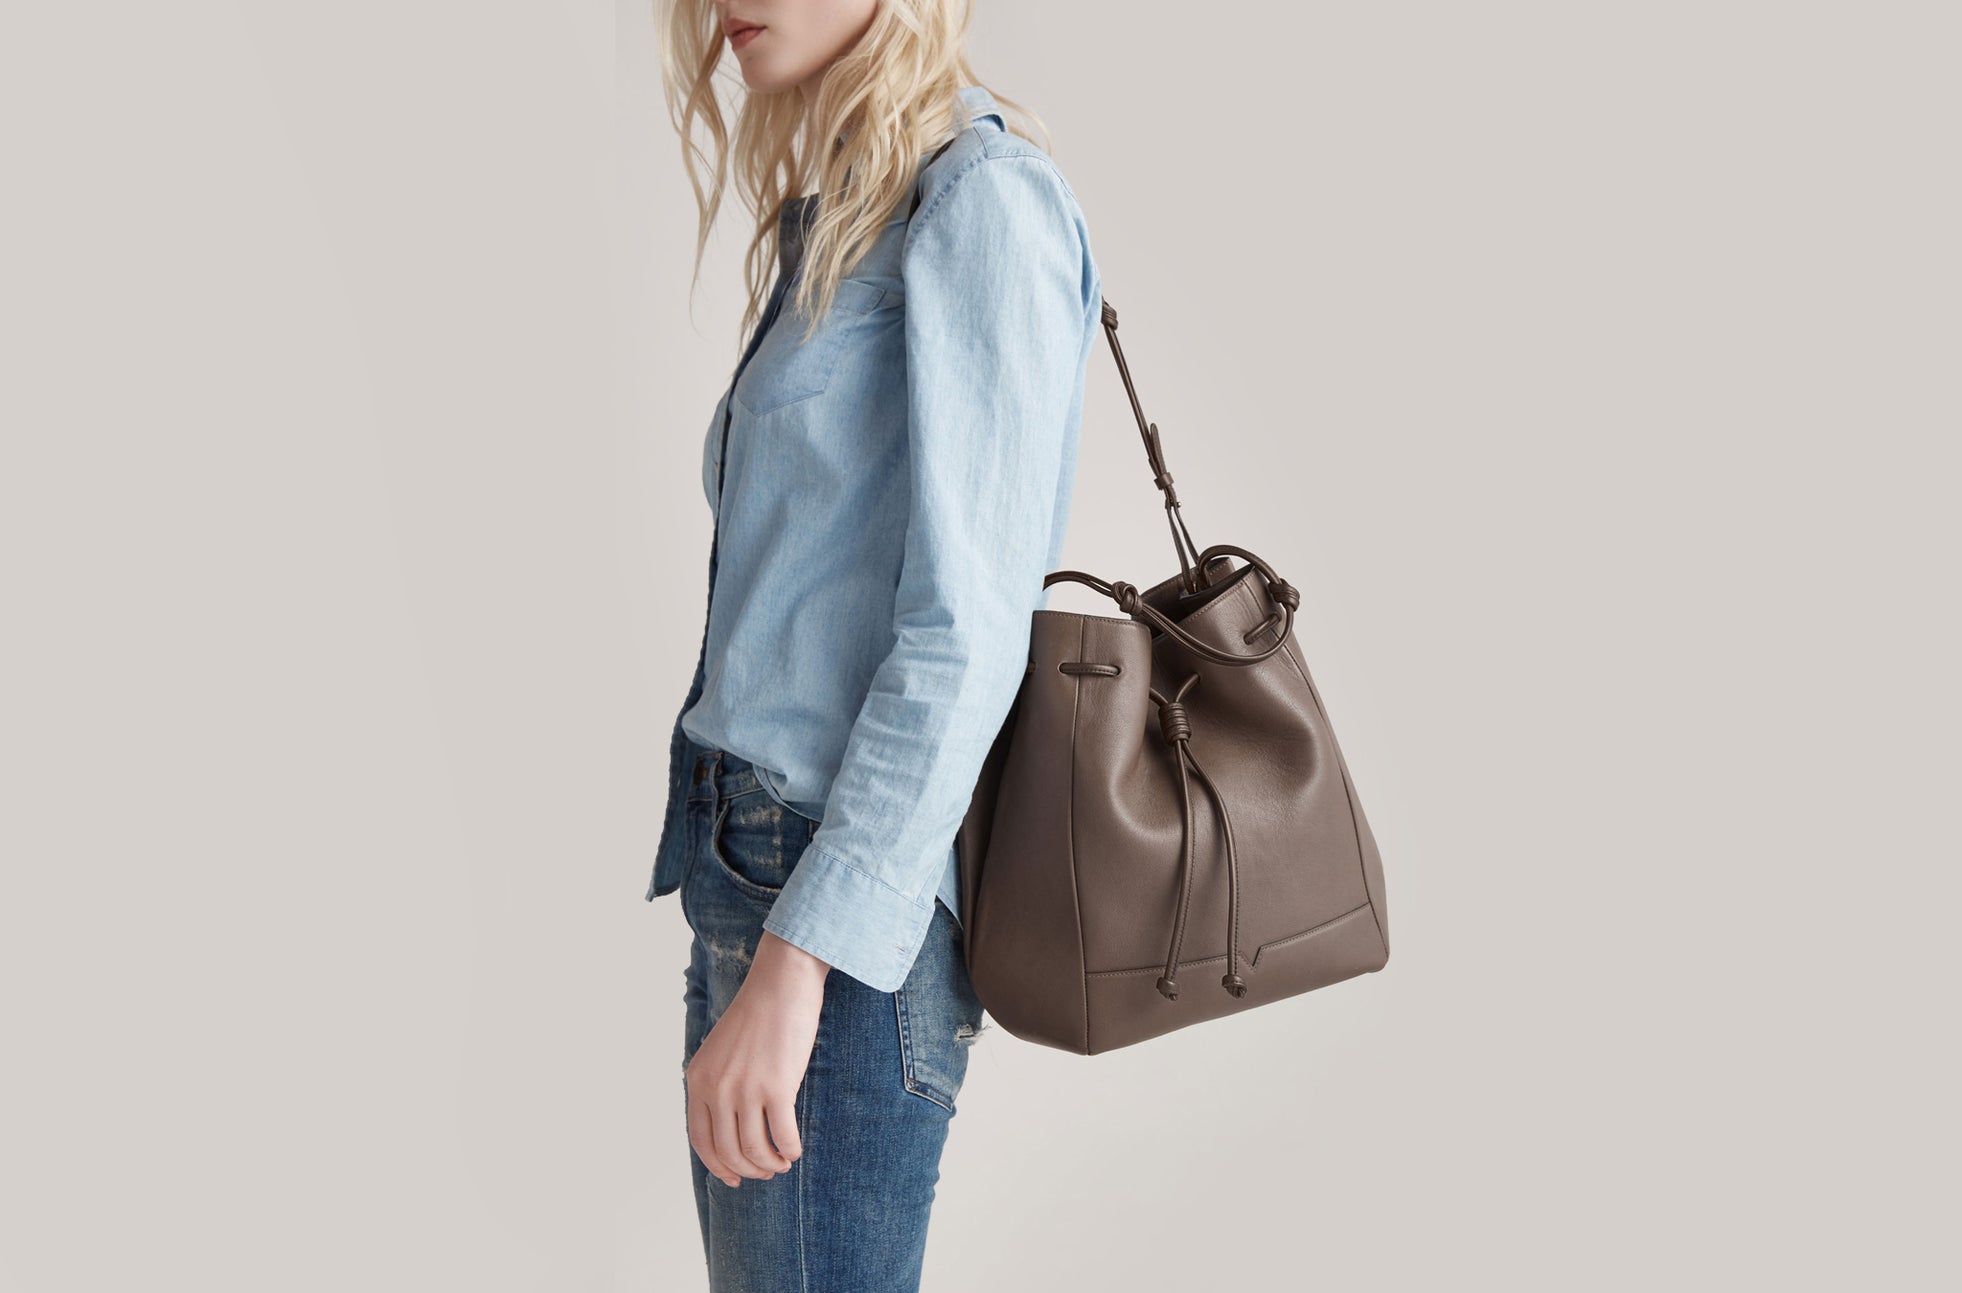 The Large Bucket Backpack in Technik-Leather in Taupe image 5